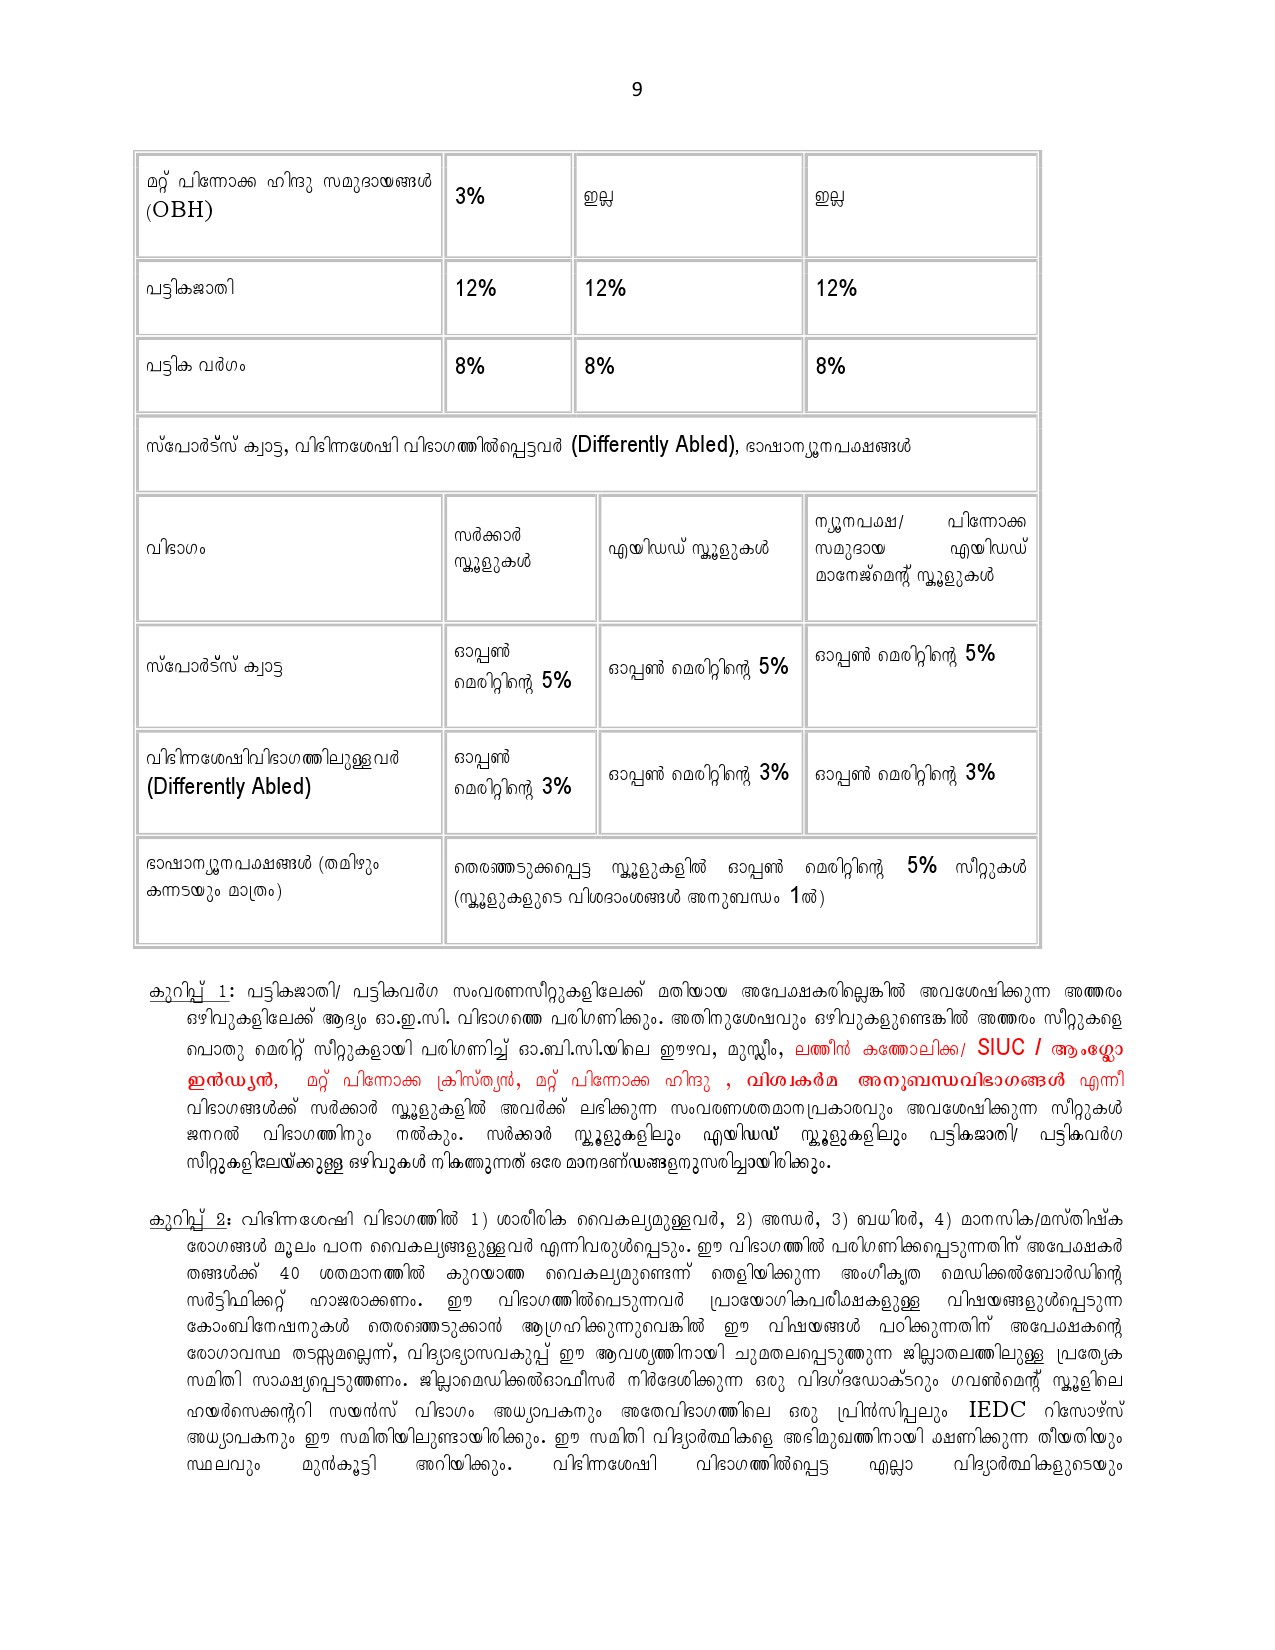 How To Apply For Kerala Higher Secondary Admission 2019 - Notification Image 9